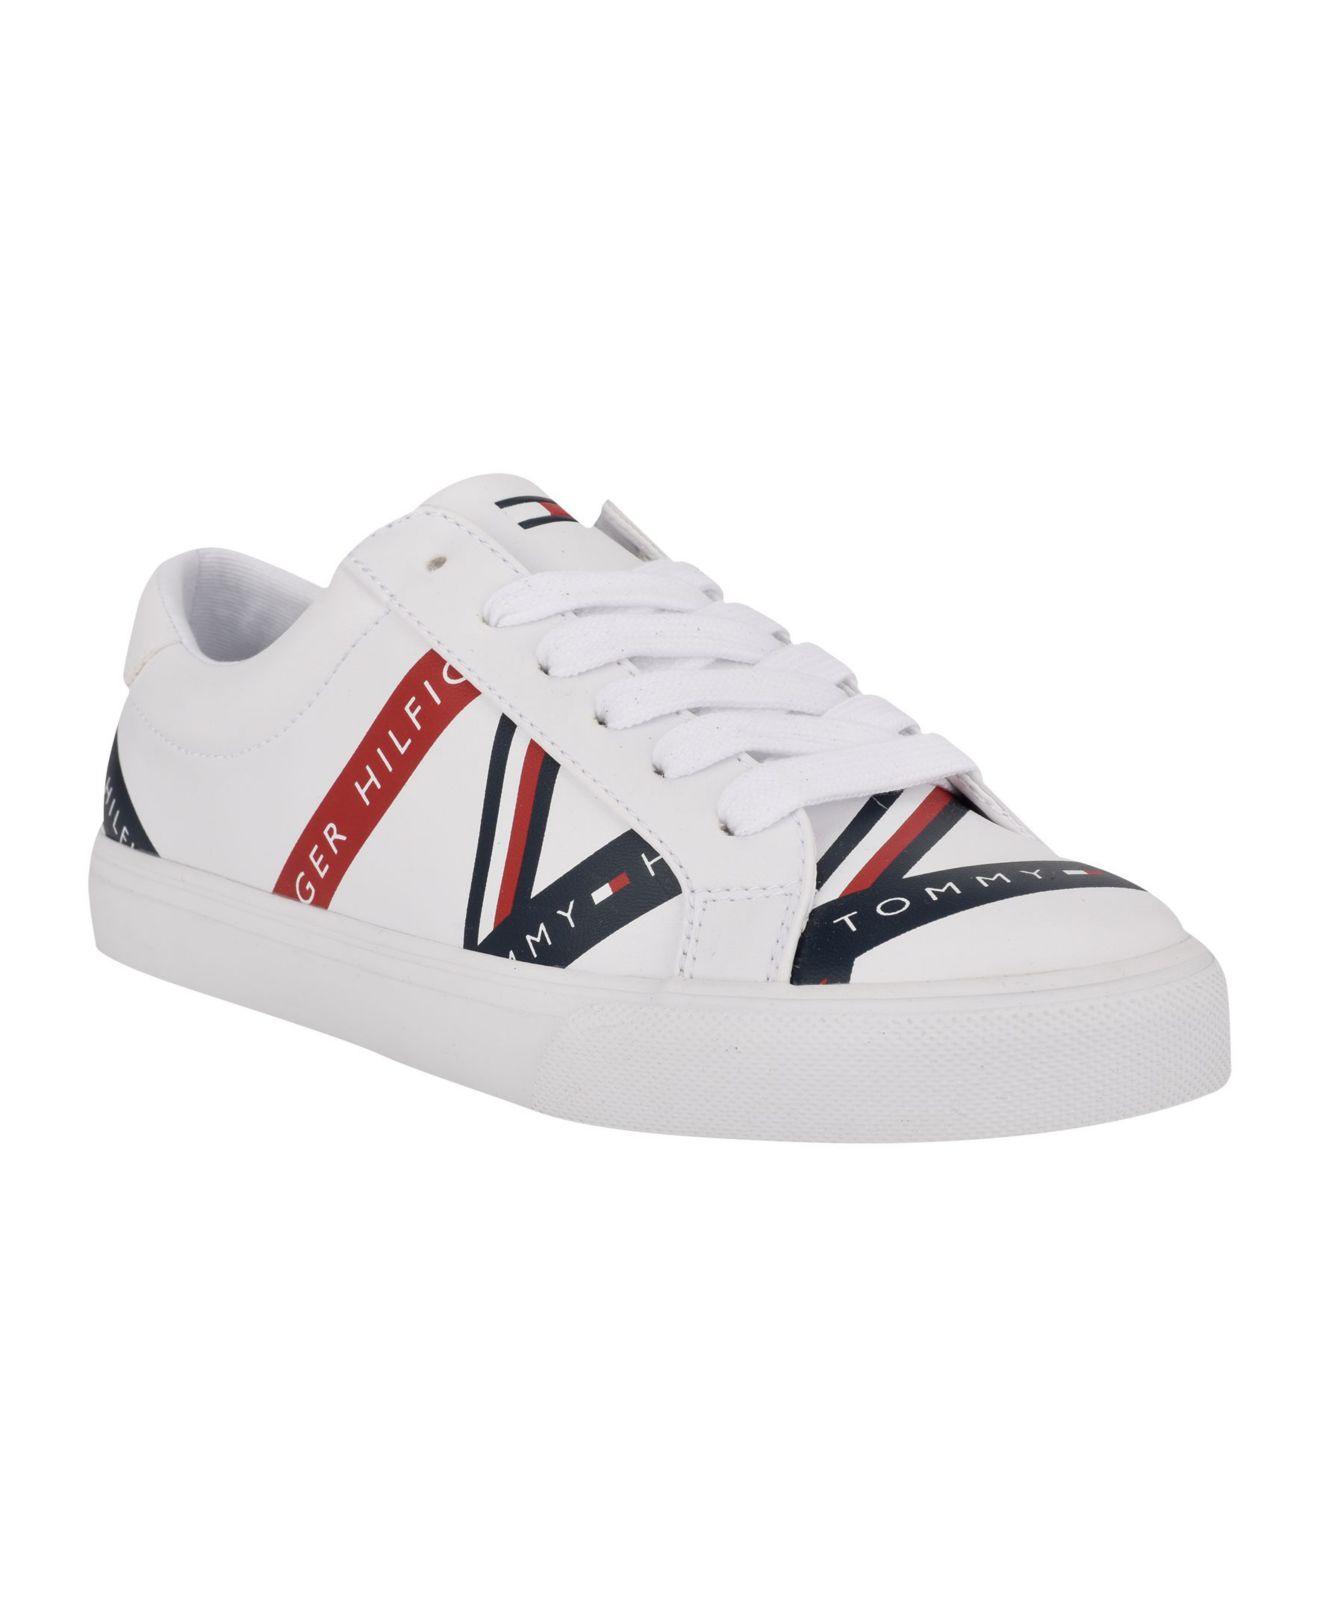 Tommy Hilfiger Lacen Lace Up Sneakers in White | Lyst